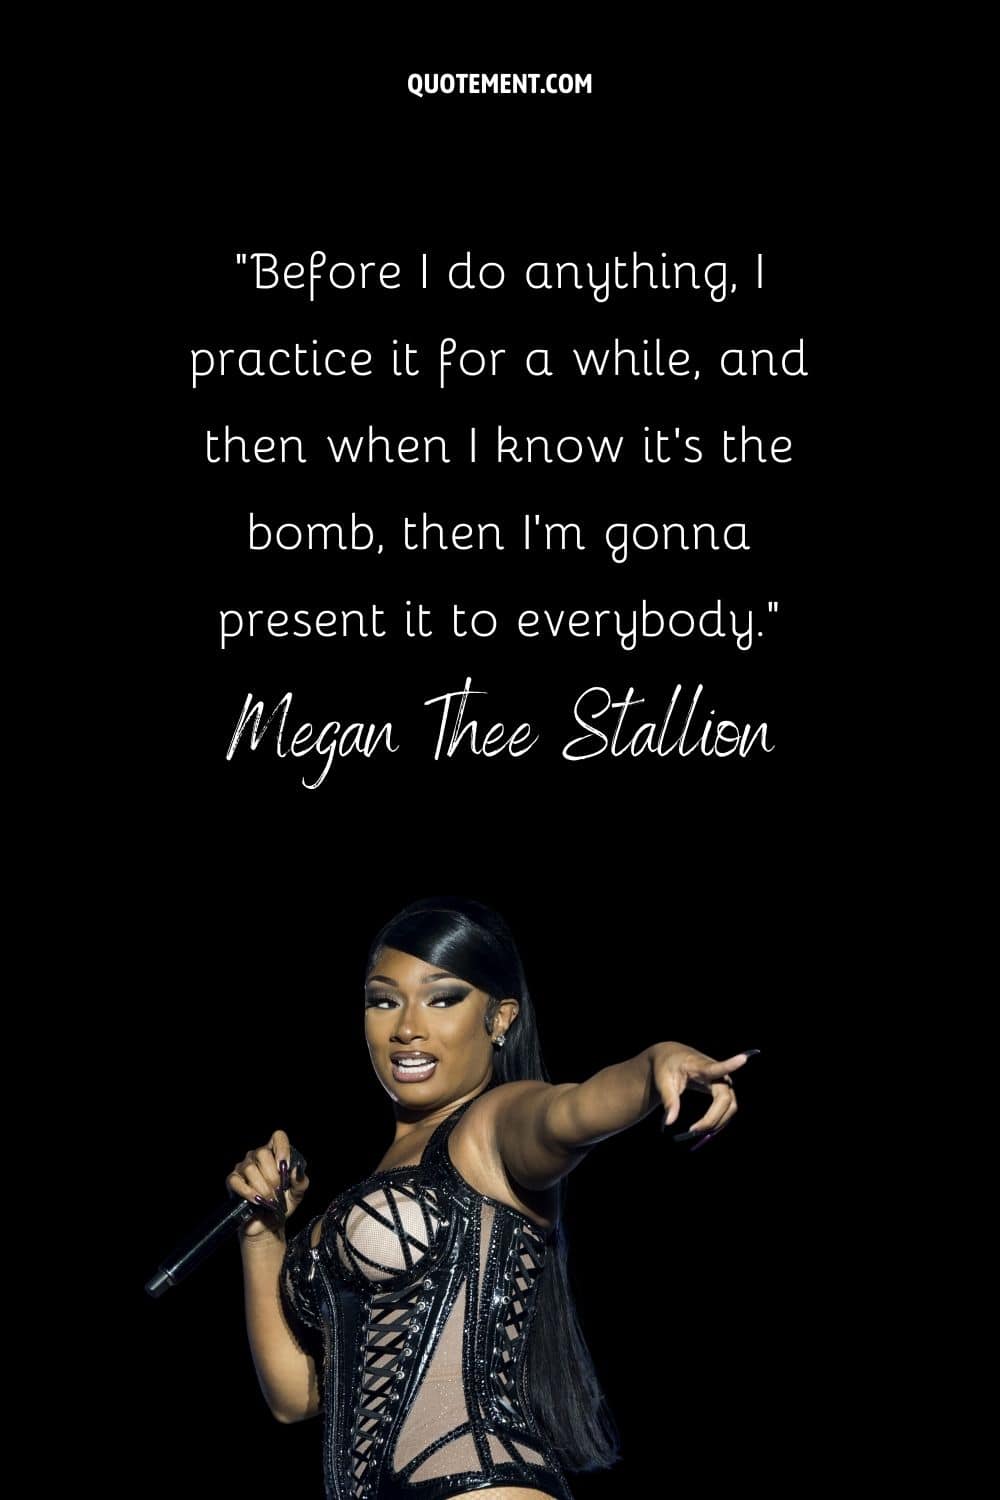 “Before I do anything, I practice it for a while, and then when I know it's the bomb, then I'm gonna present it to everybody.” — Megan Thee Stallion